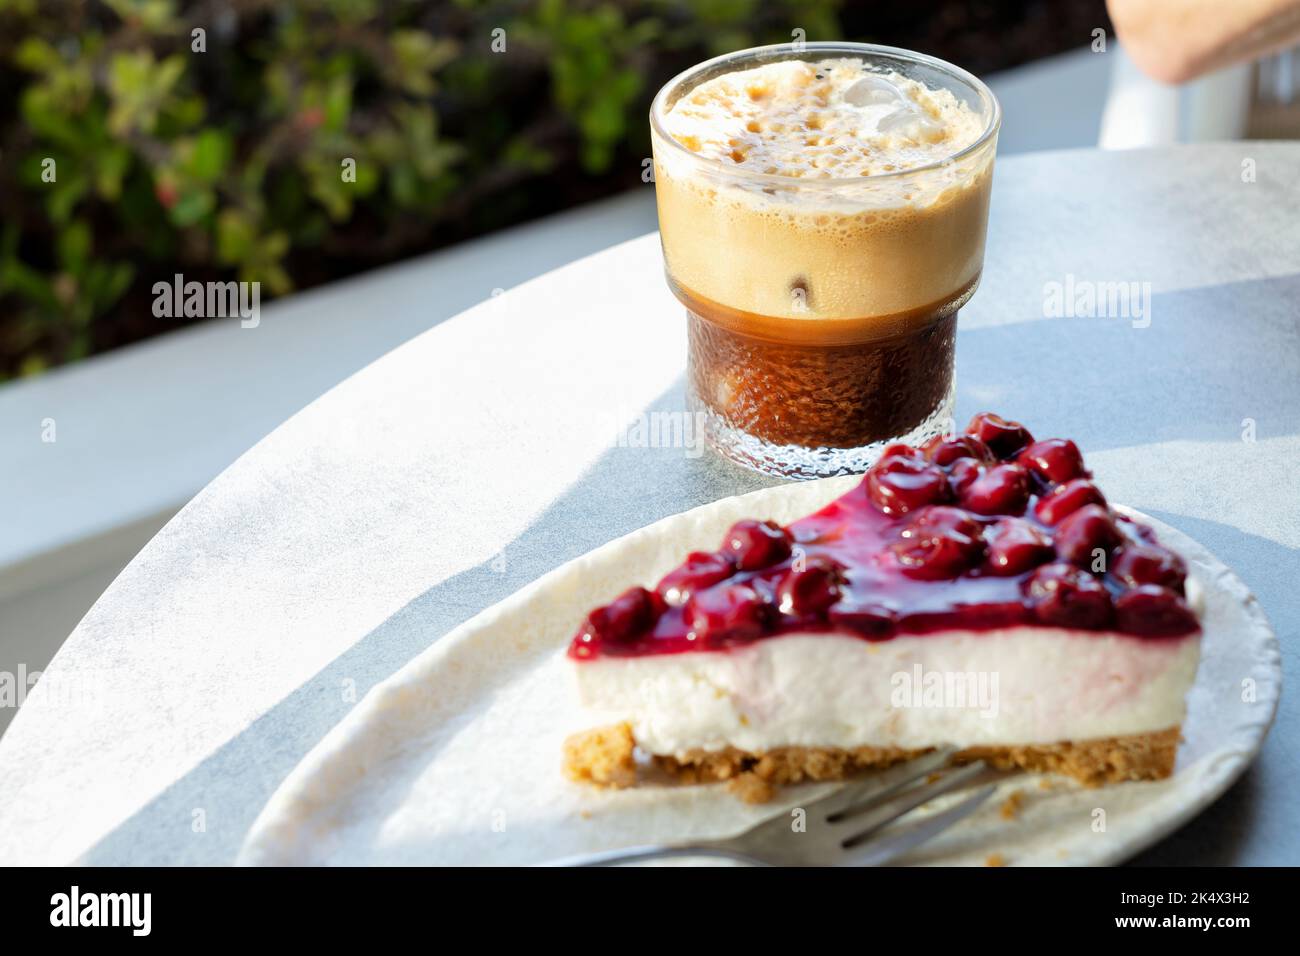 A single slice, or serving, of freshly made, indulgent, cherry cheese cake. Its served on a plate with an iced coffee to an outside table in a cafe. Stock Photo